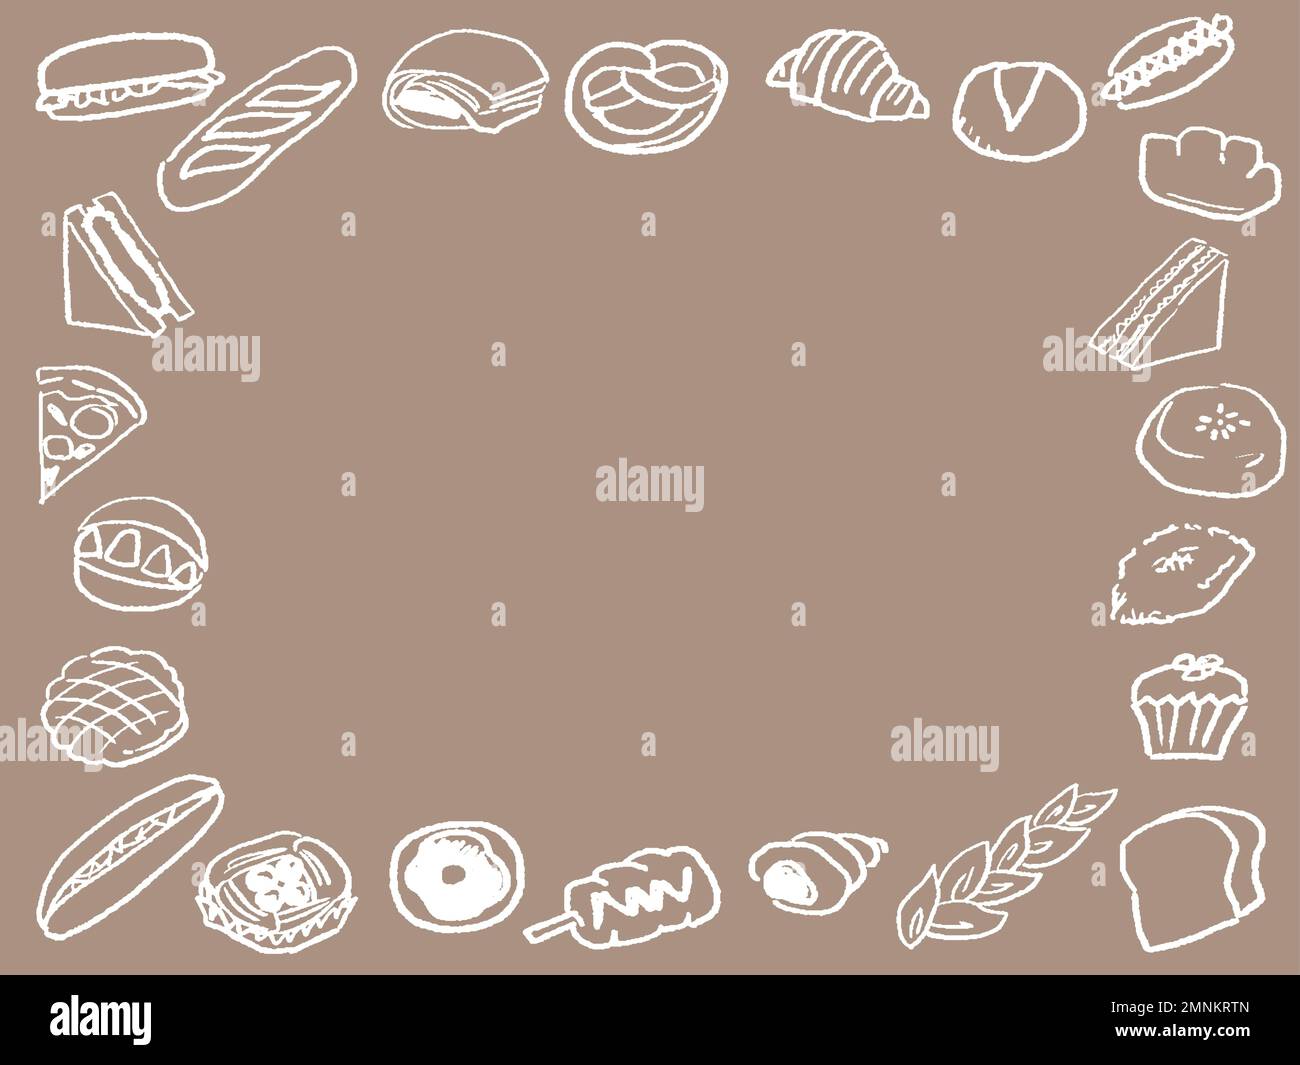 Hand drawn line drawing frame of various bread.  Illustrations of delicious-looking bread such as bread, visas and sandwiches. Stock Vector